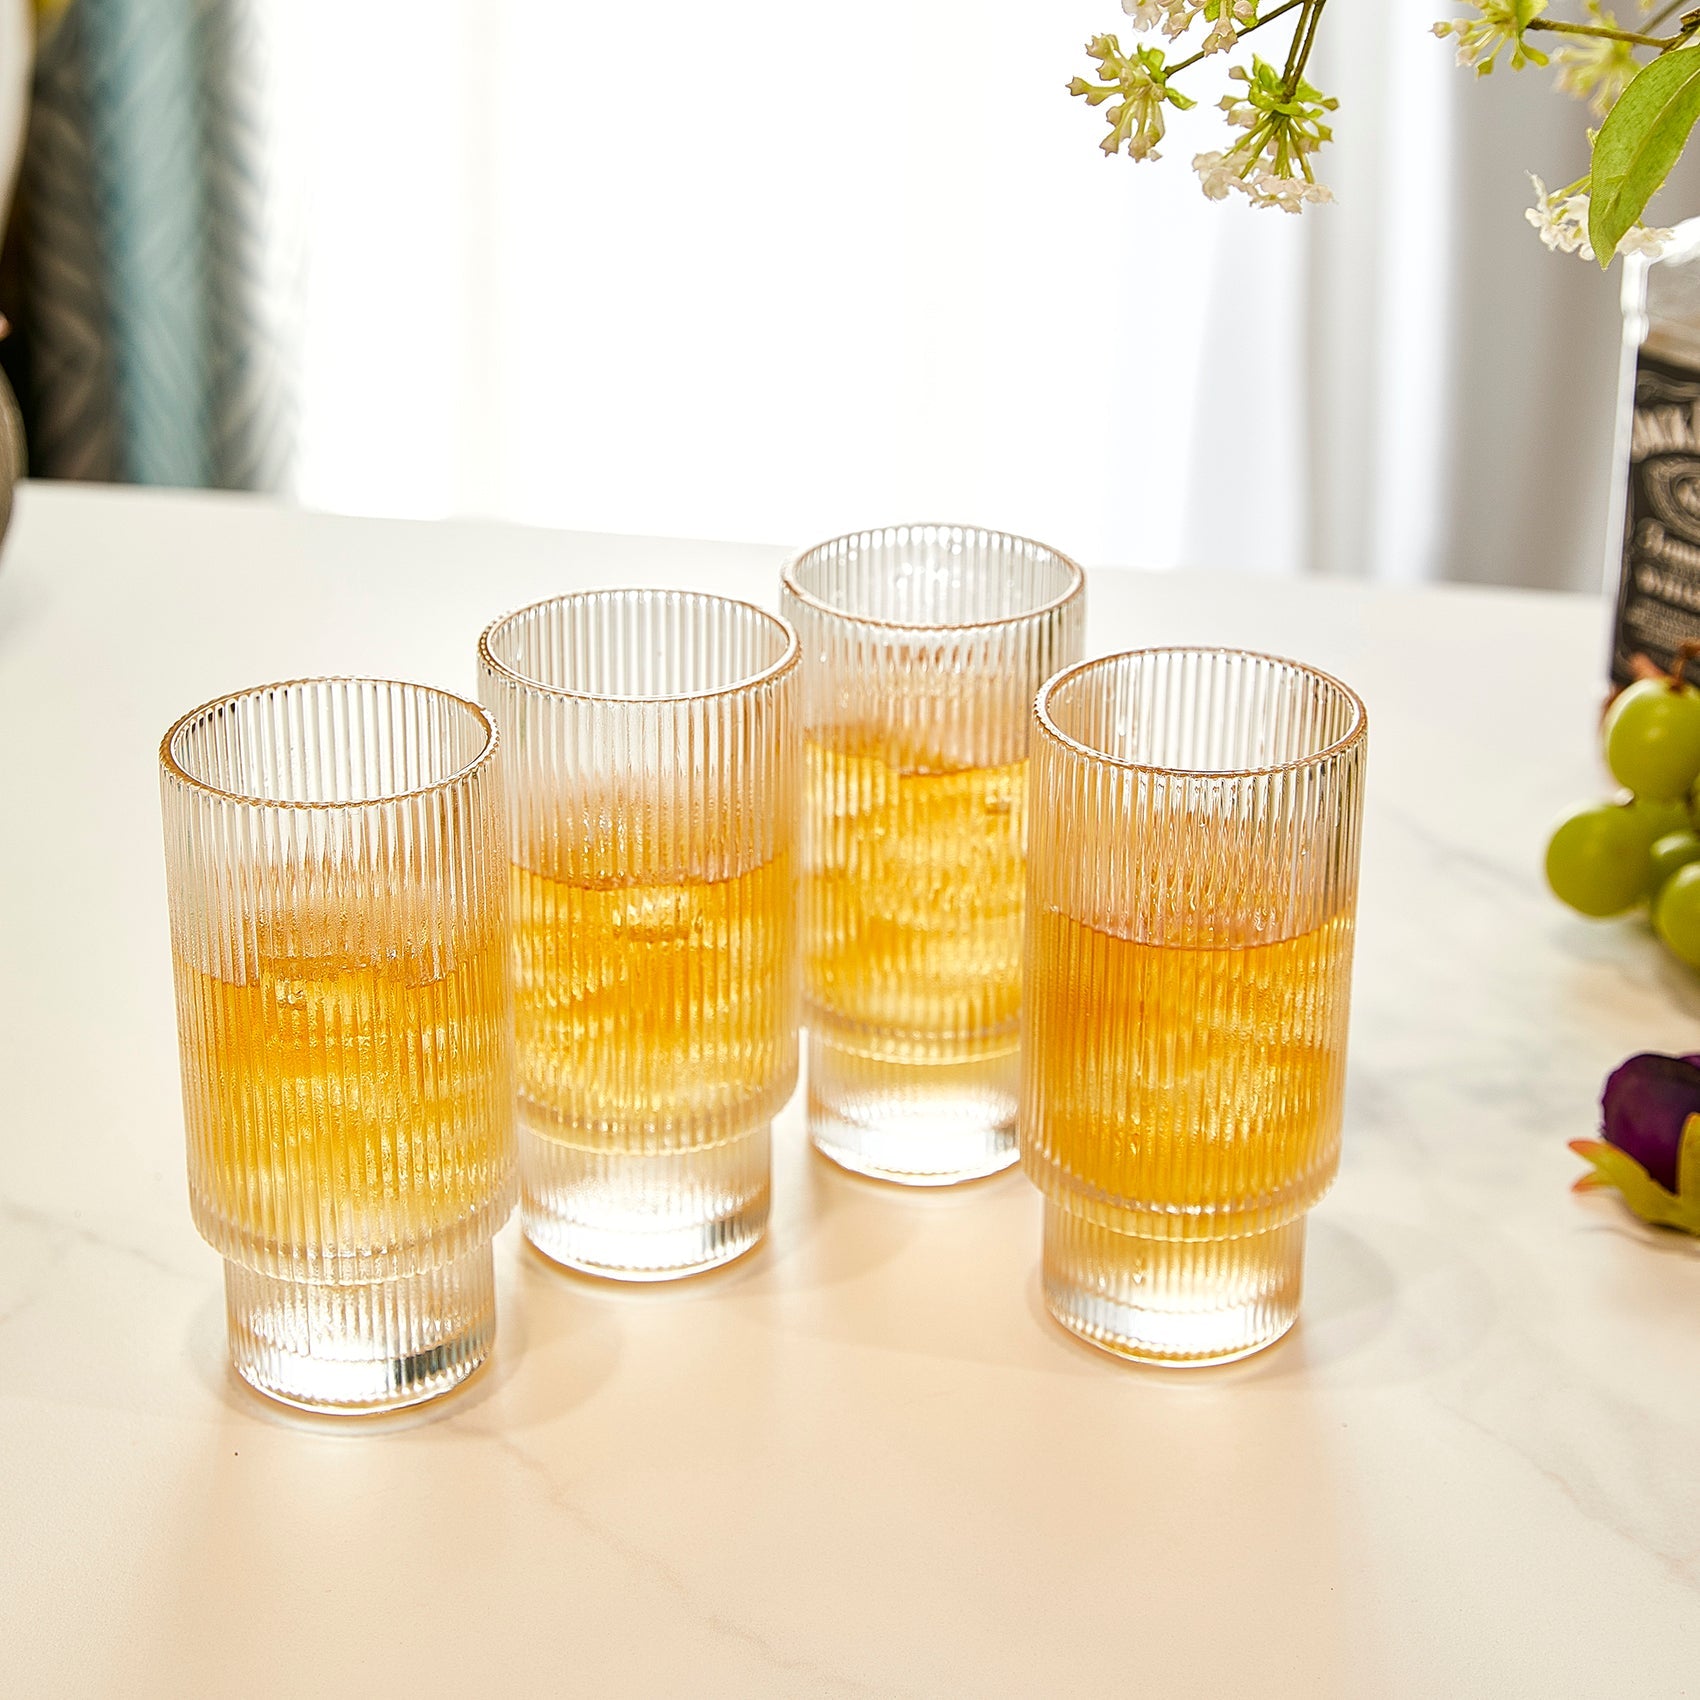 Vintage Art Deco Crystal Highball Ribbed Glass Set of 4 - Ripple, Collins Glassware 14oz Classic Crystal Cocktail Glasses Perfect for Water, Champagne, Beer, Juice, Tom Cocktails - Barware Tumblers-2